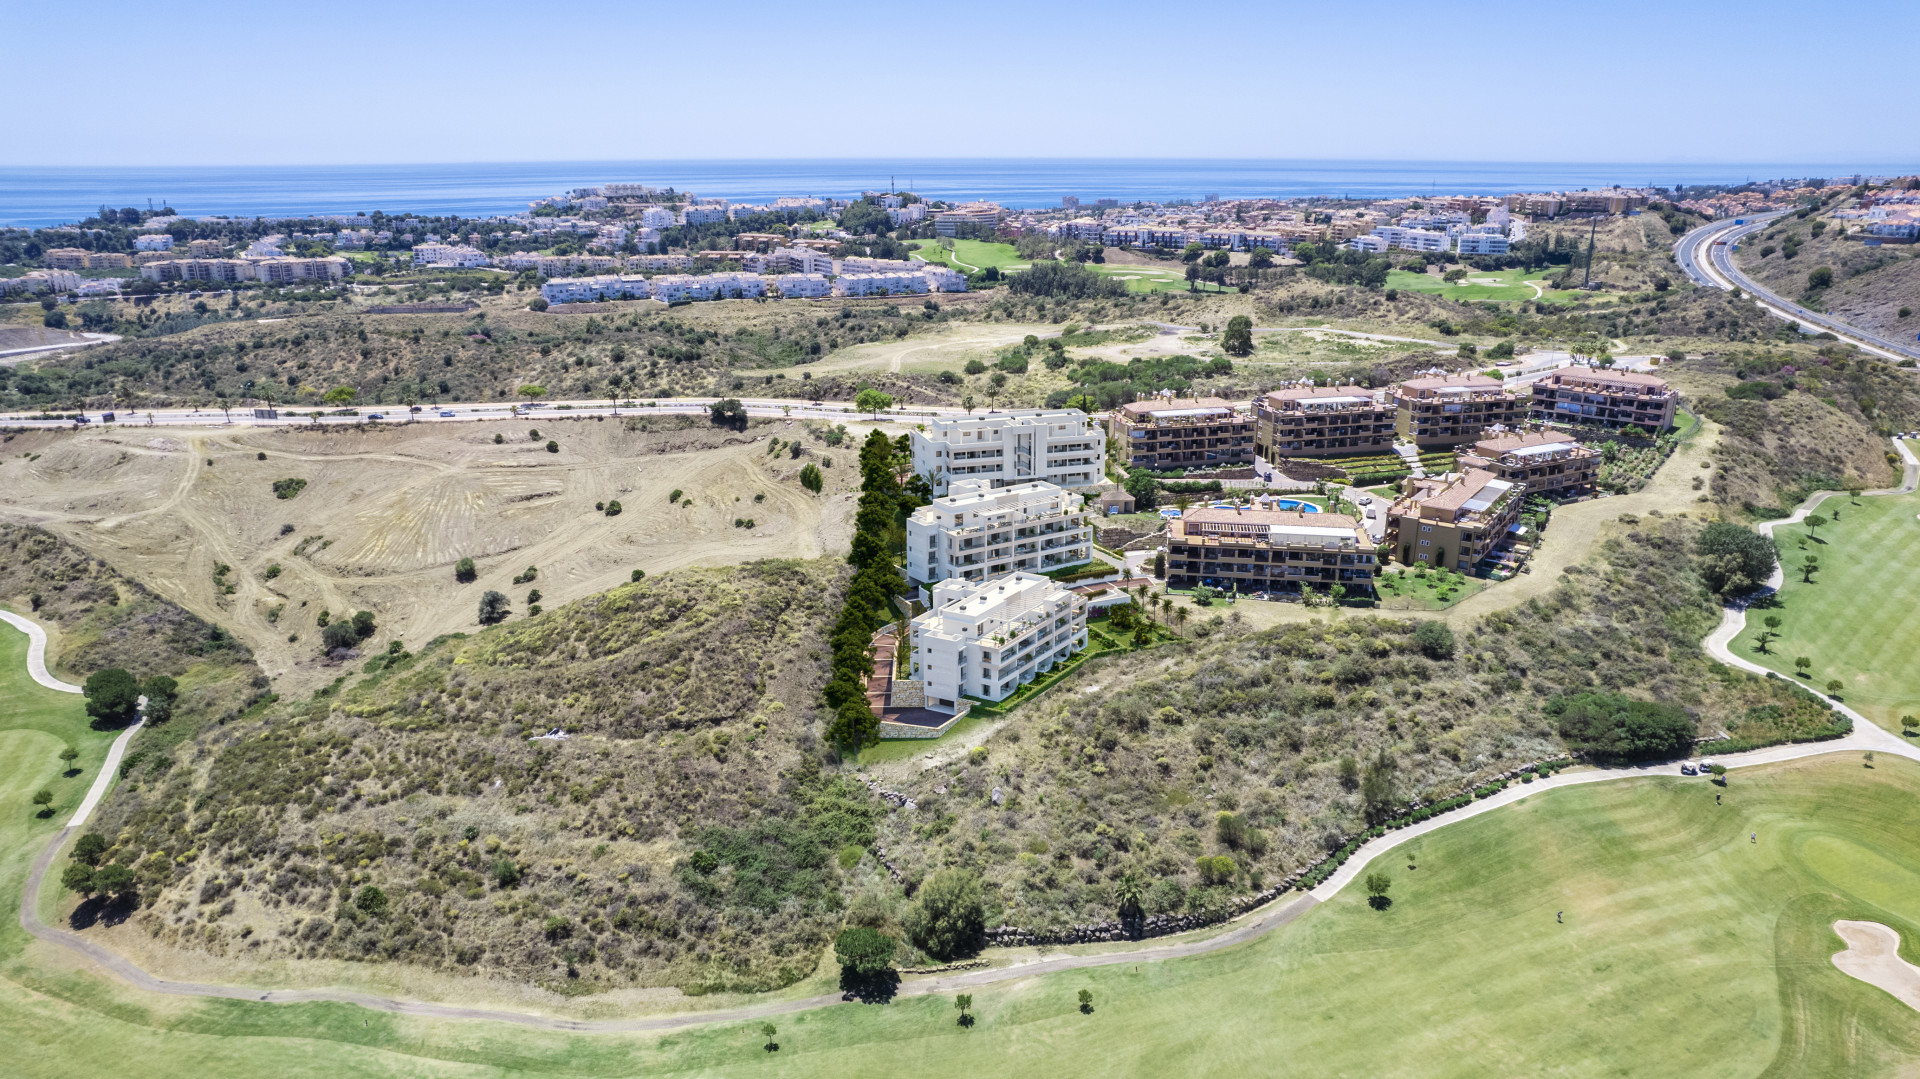 Dream Golf Calanova: Luxury residential project located on the first line of the Calanova golf course in the municipality of Mijas, Malaga. | Image 5